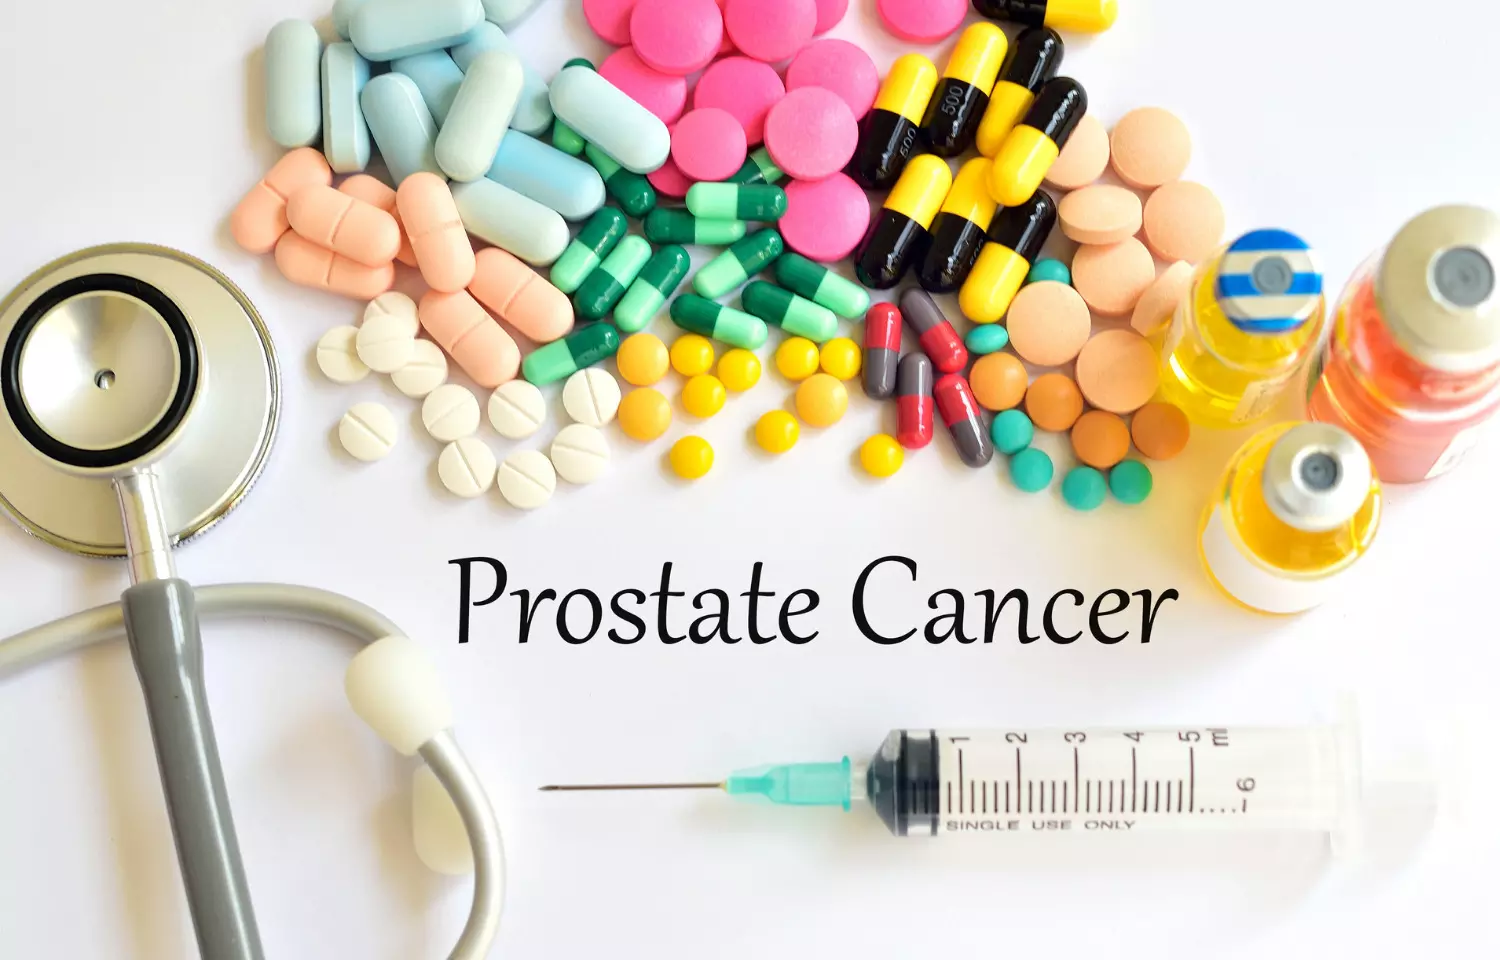 Intake of 5-ARIs for BPH not associated with increased mortality in prostate cancer